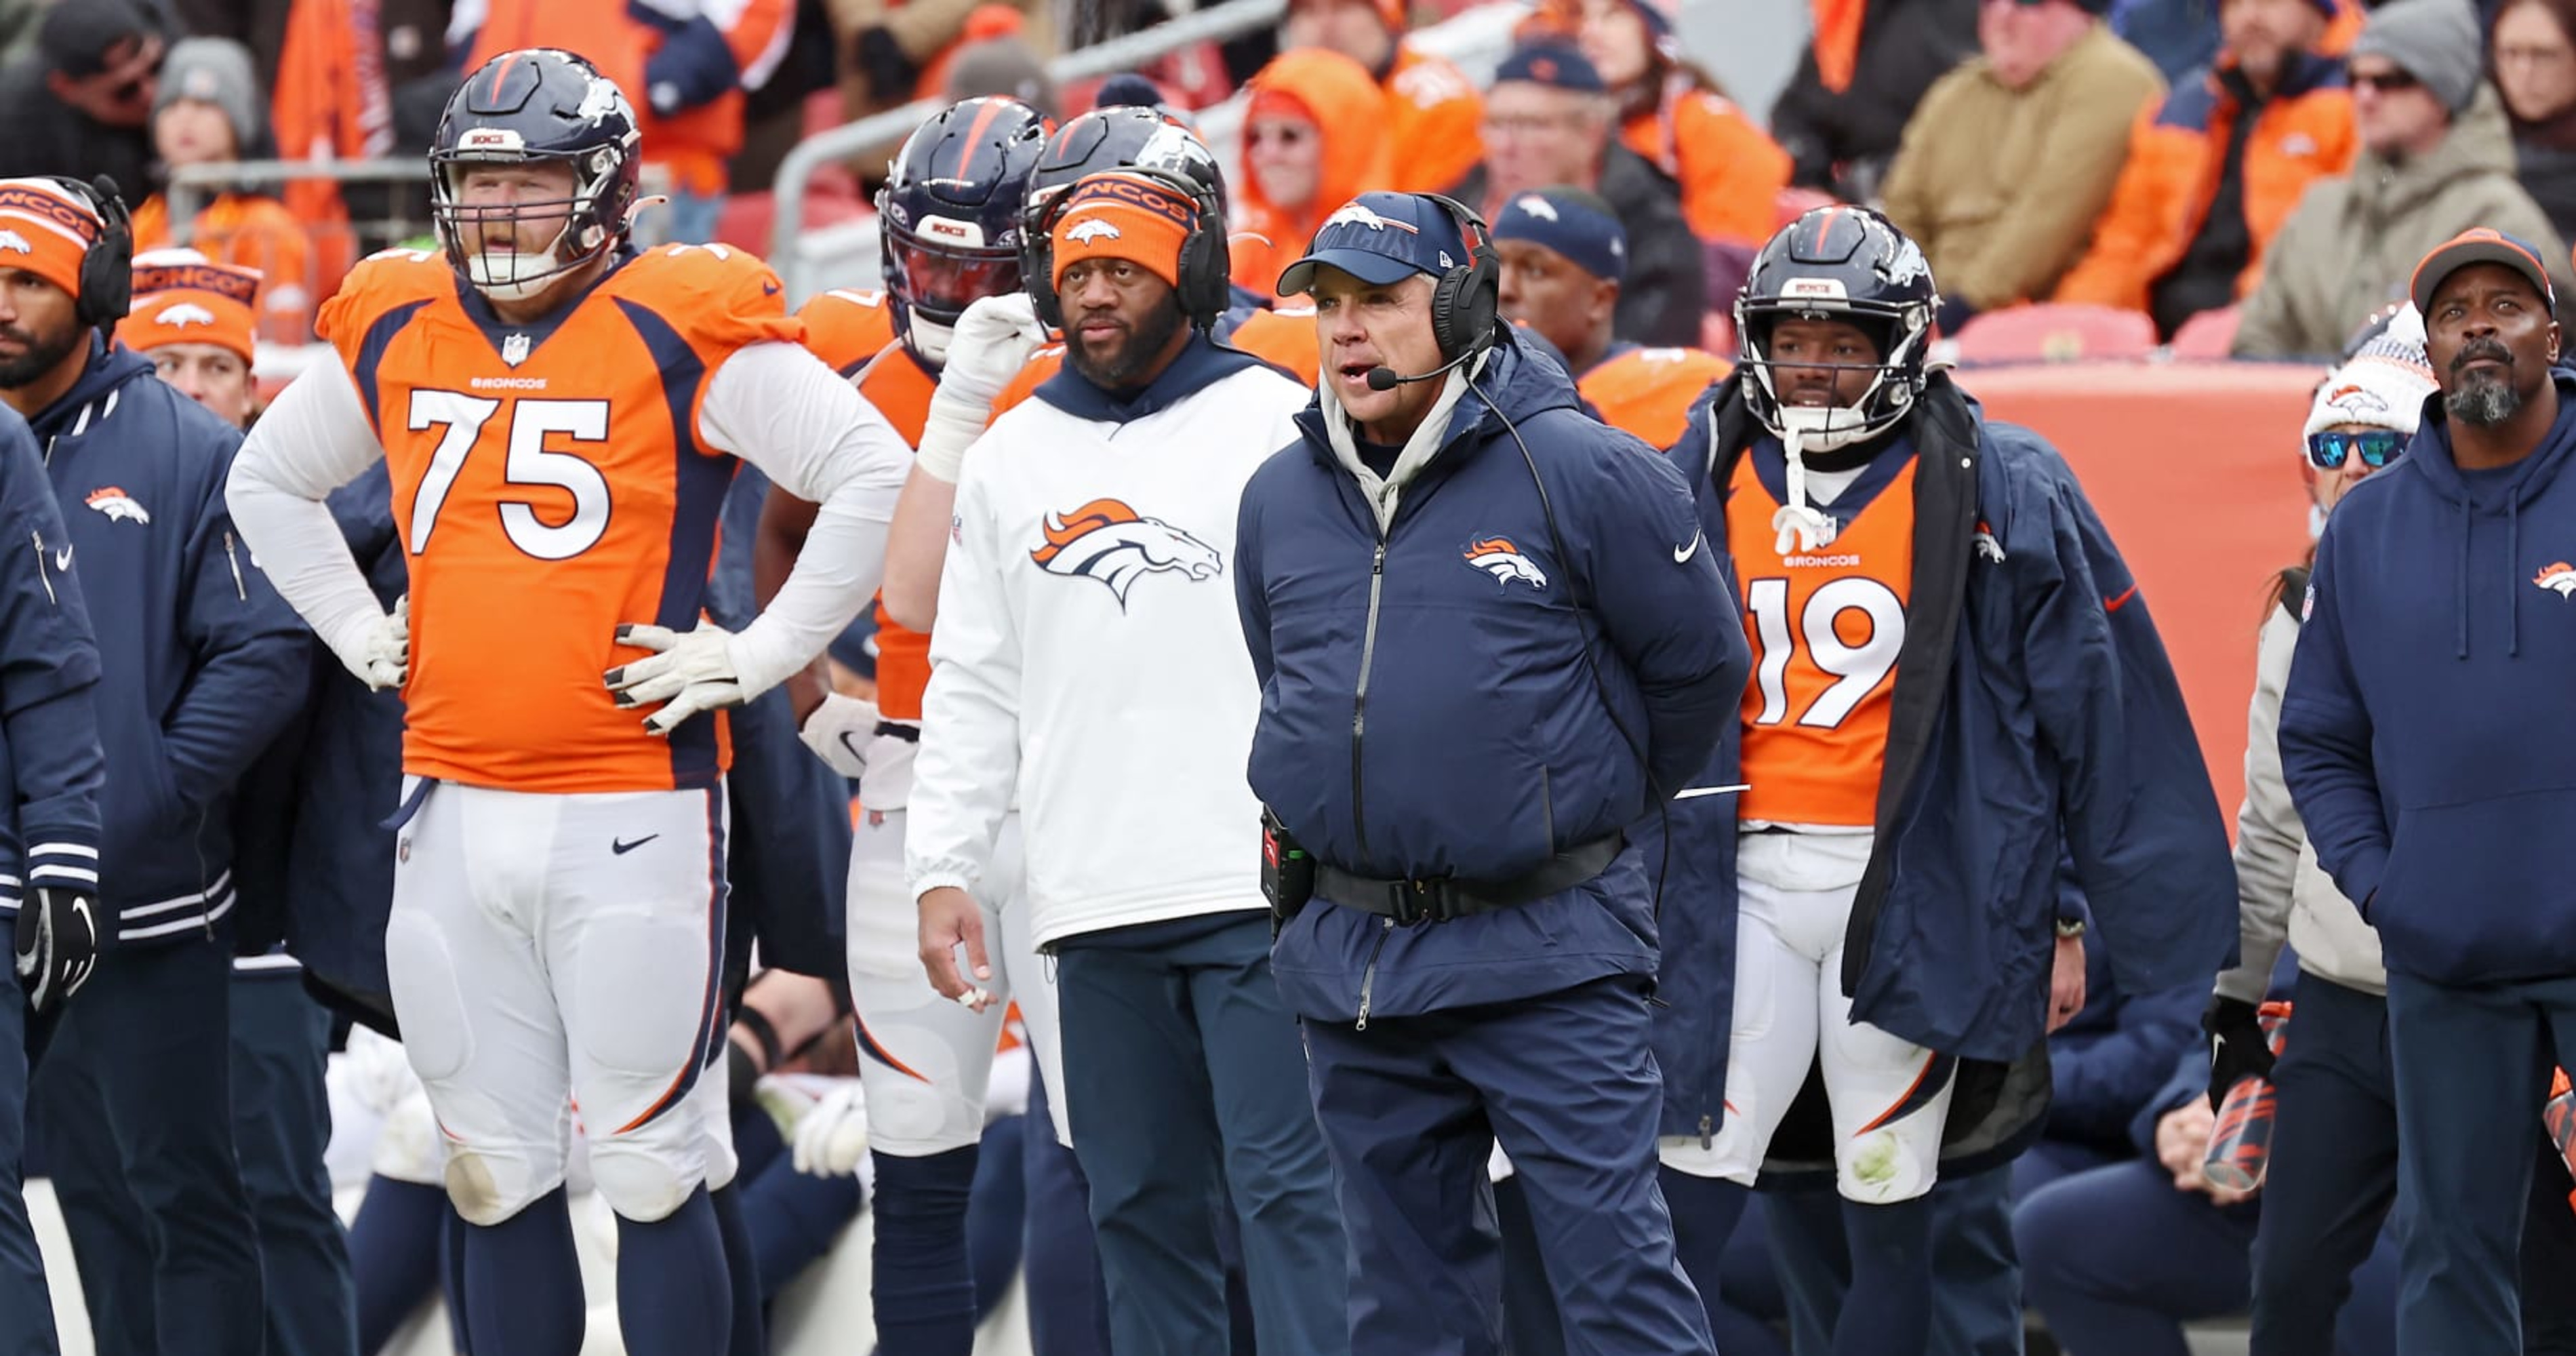 Sean Payton: Broncos 'Not Even Remotely Shopping Anyone' Ahead of NFL Trade Deadline